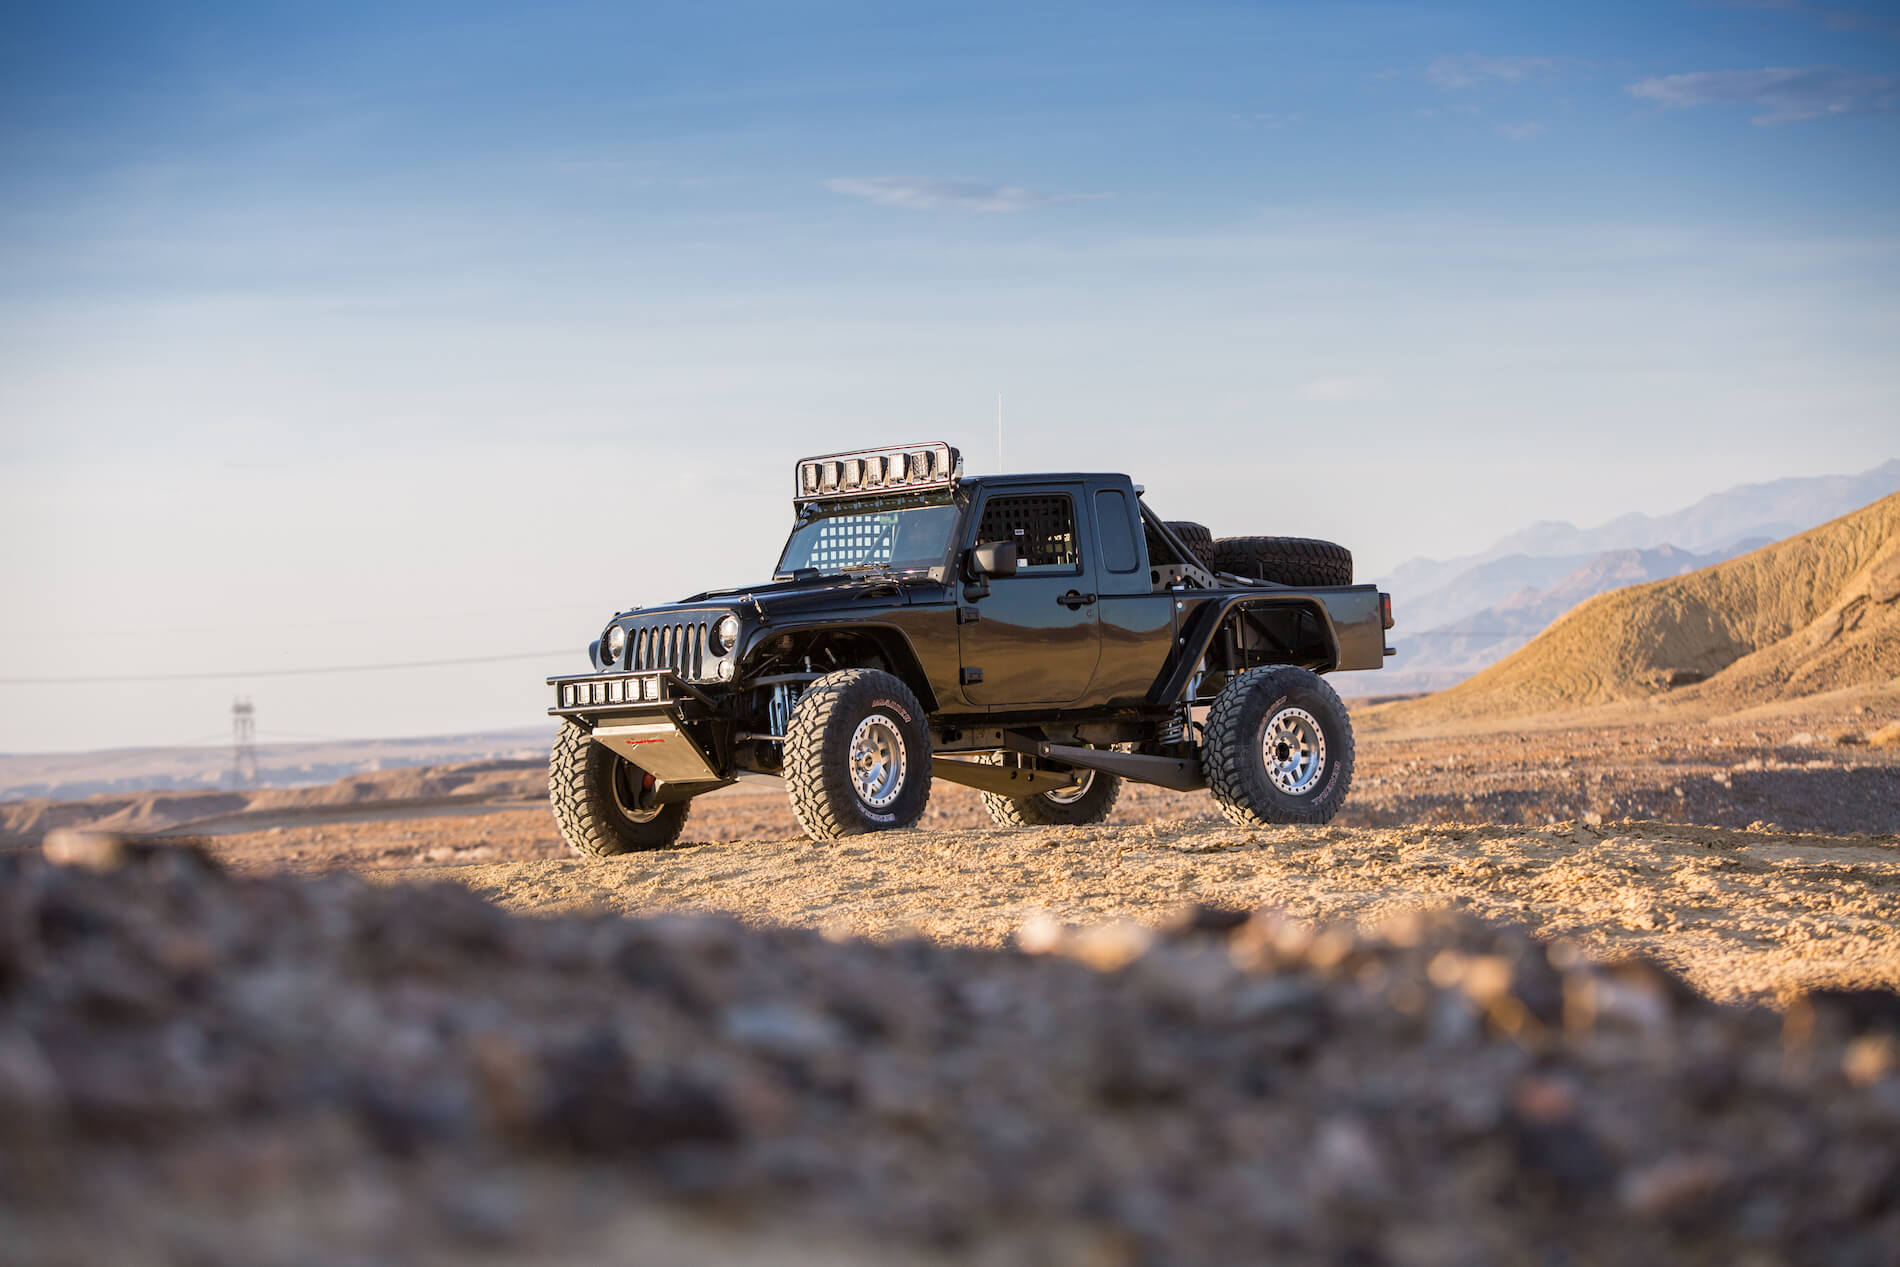 Best Jeep JK Upgrades: Will Heaton's Jeep Is Built For Speed